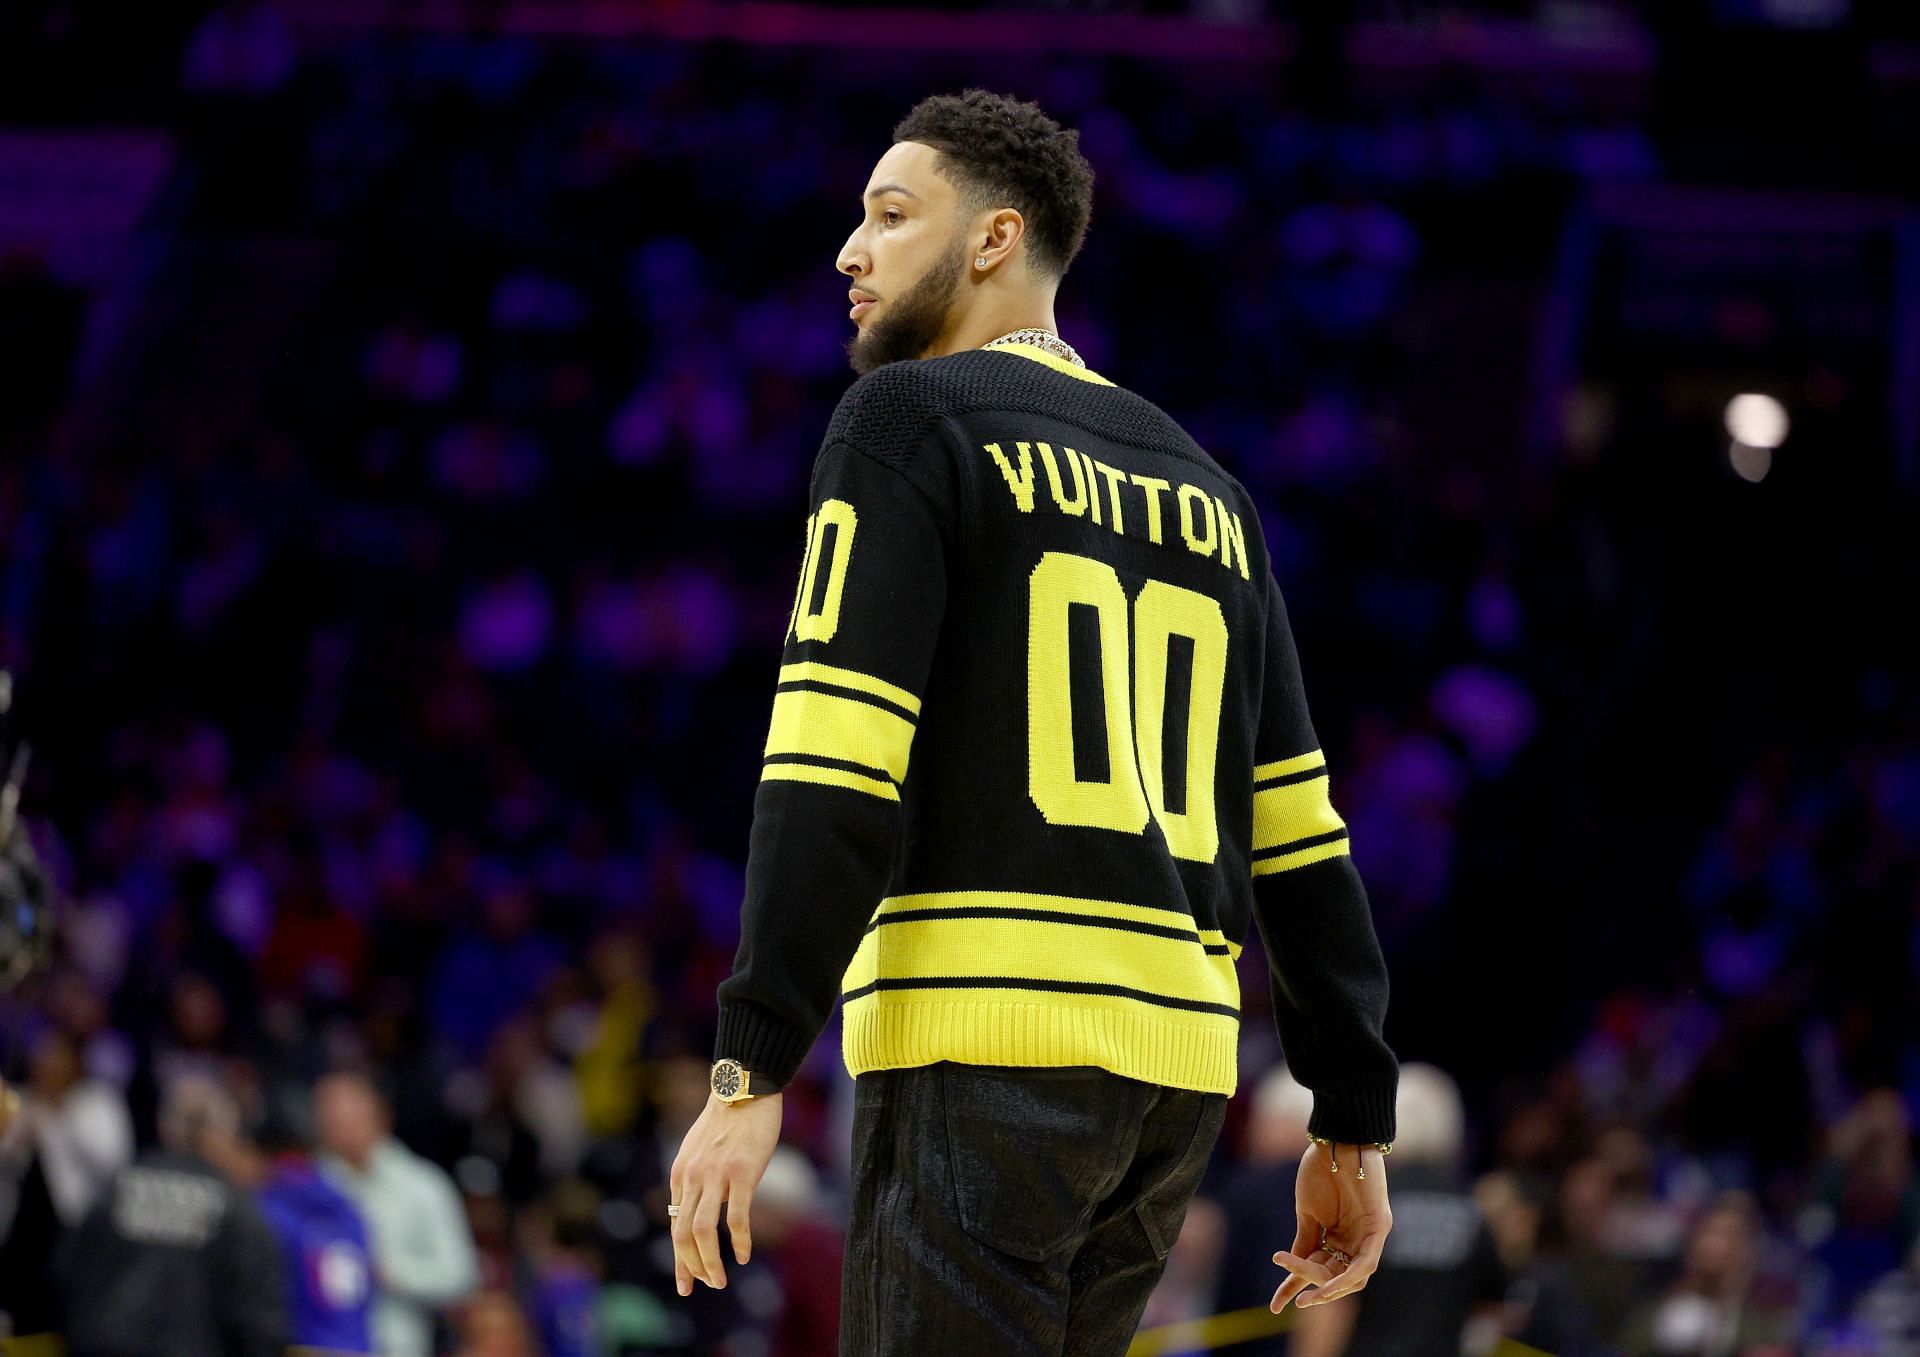 Ben Simmons #10 of the Brooklyn Nets walks on the court at halftime against the Philadelphia 76ers at Wells Fargo Center on March 10, 2022 in Philadelphia, Pennsylvania.